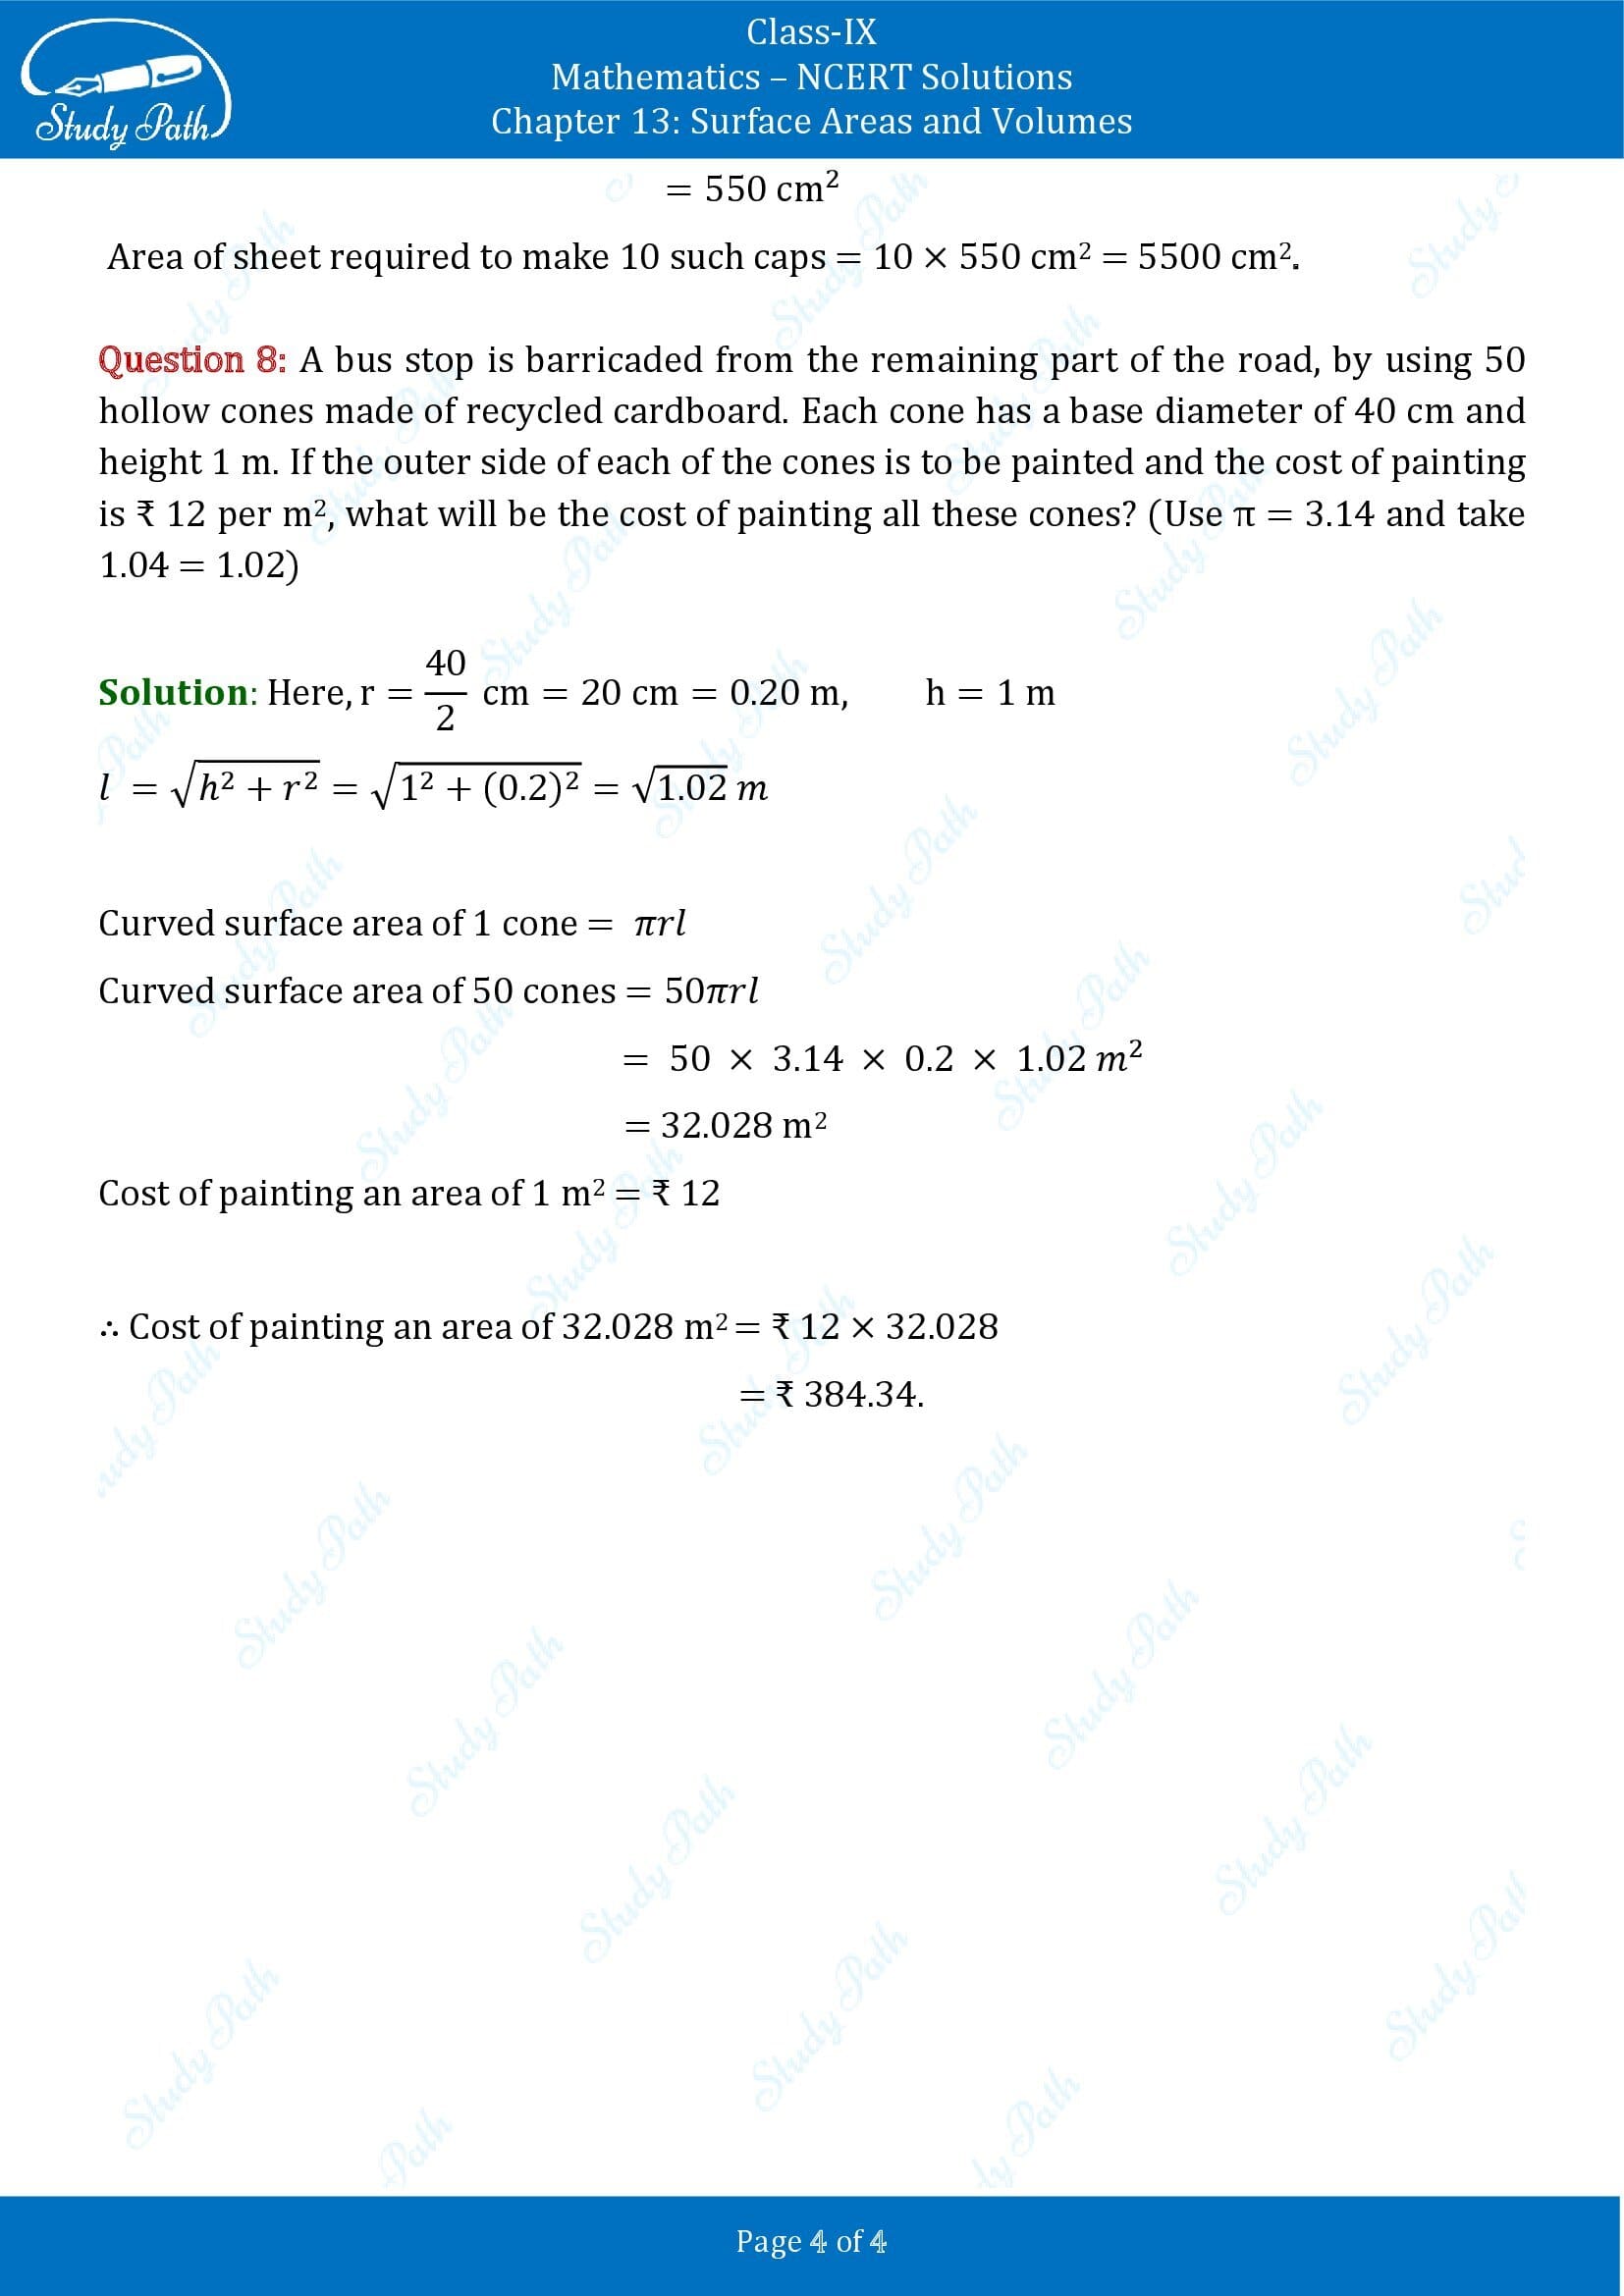 NCERT Solutions for Class 9 Maths Chapter 13 Surface Areas and Volumes Exercise 13.3 00004